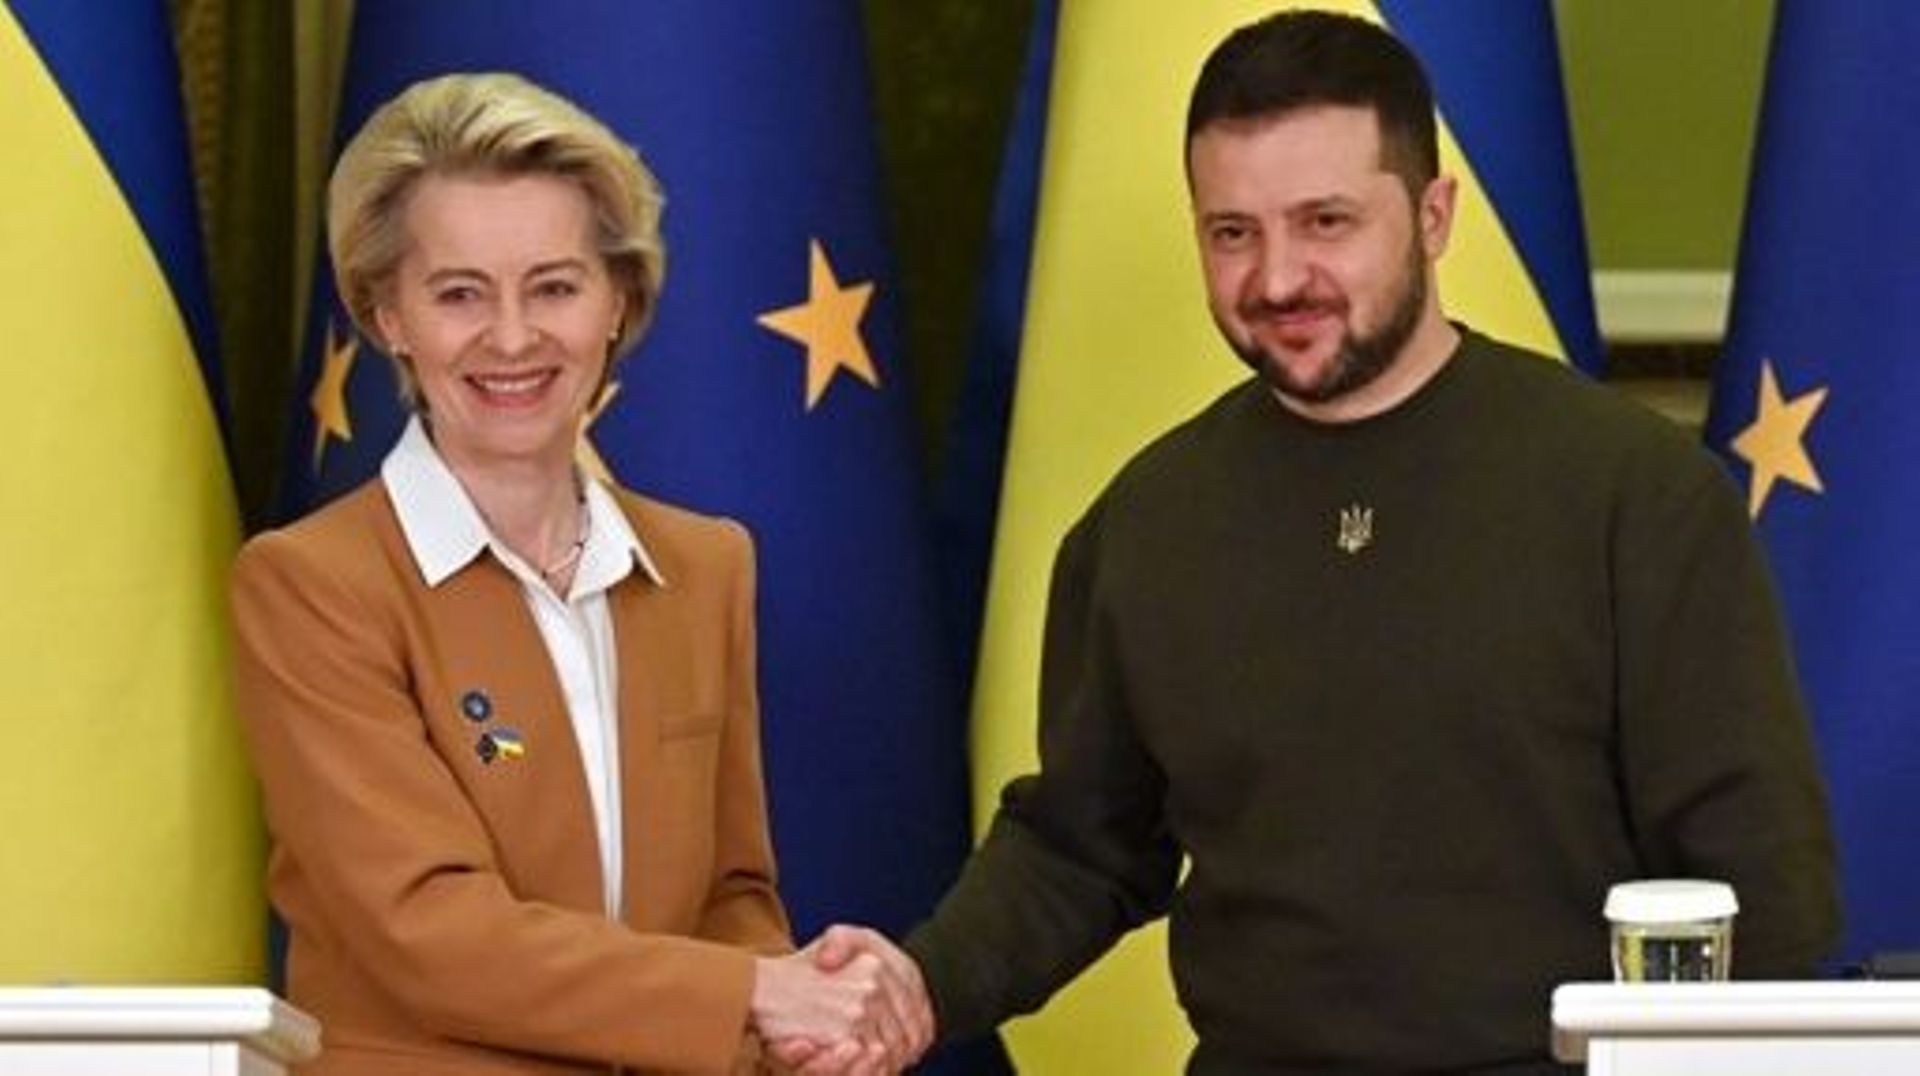 Ukrainian President Volodymyr Zelensky and President of the European Commission Ursula von der Leyen shake hands after a joint press conference after talks in Kyiv on February 2, 2023. The European Commission chief announced she had arrived in Kyiv with a